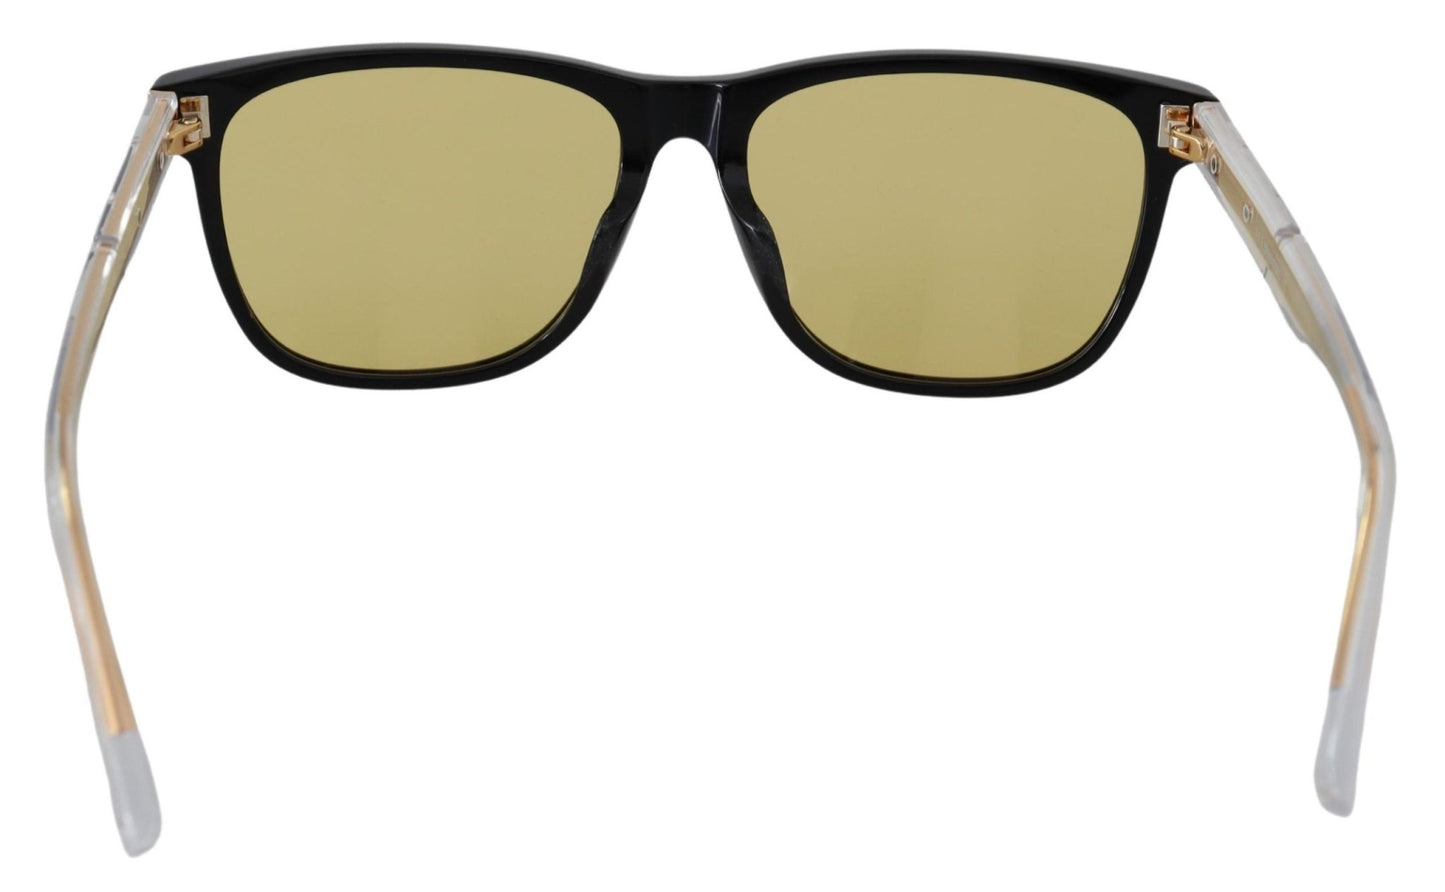 Diesel Chic Black Acetate Sunglasses with Yellow Lenses